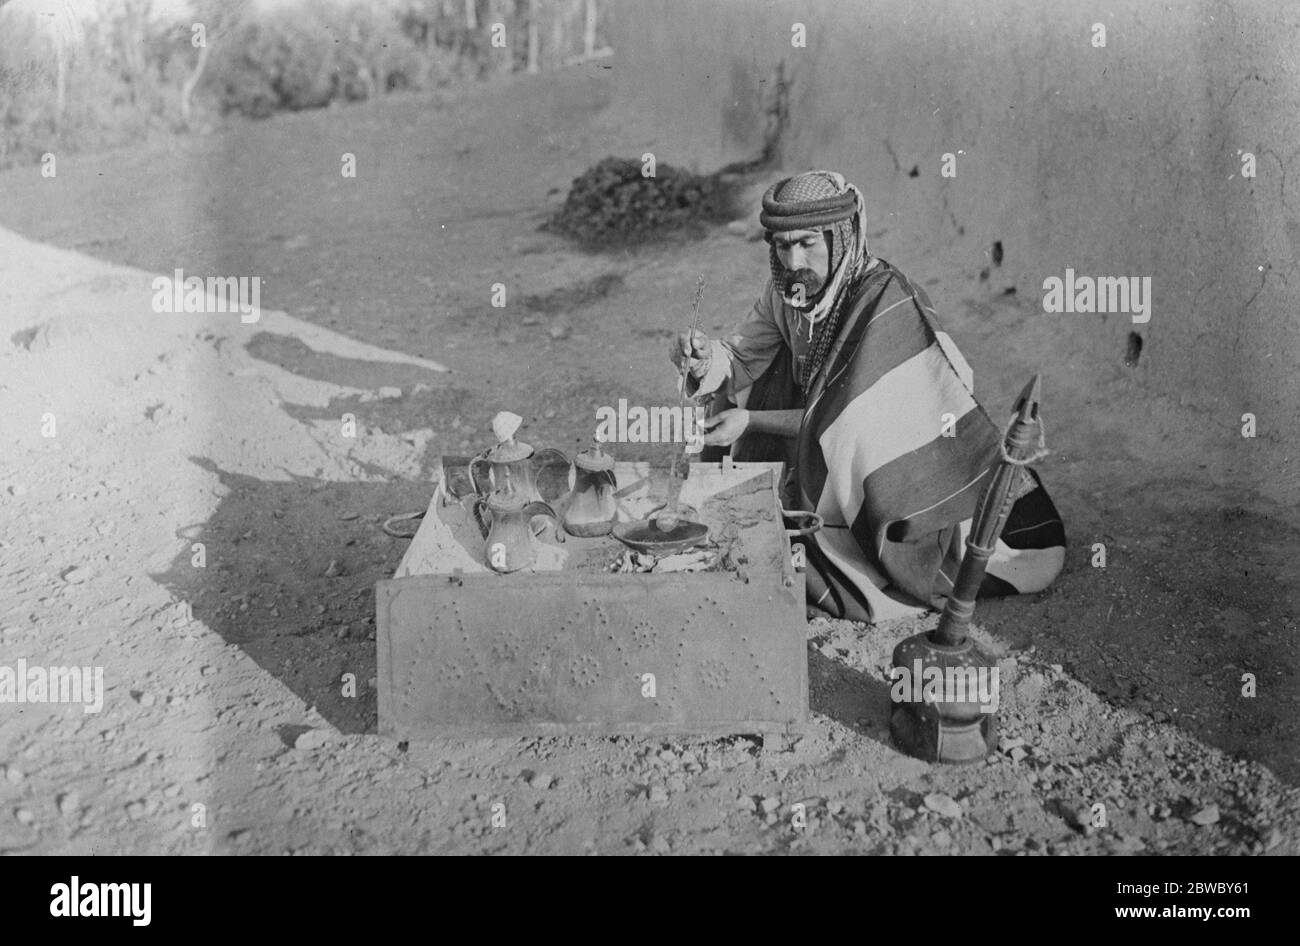 The rebel Sultan whose forces have defeated the French in Syria . Sultan Pasha El Atrash , the Druse rebel sheikh , who led the attack which resulted in the severe defeat of the French forces in Syria . 10 August 1925 Stock Photo